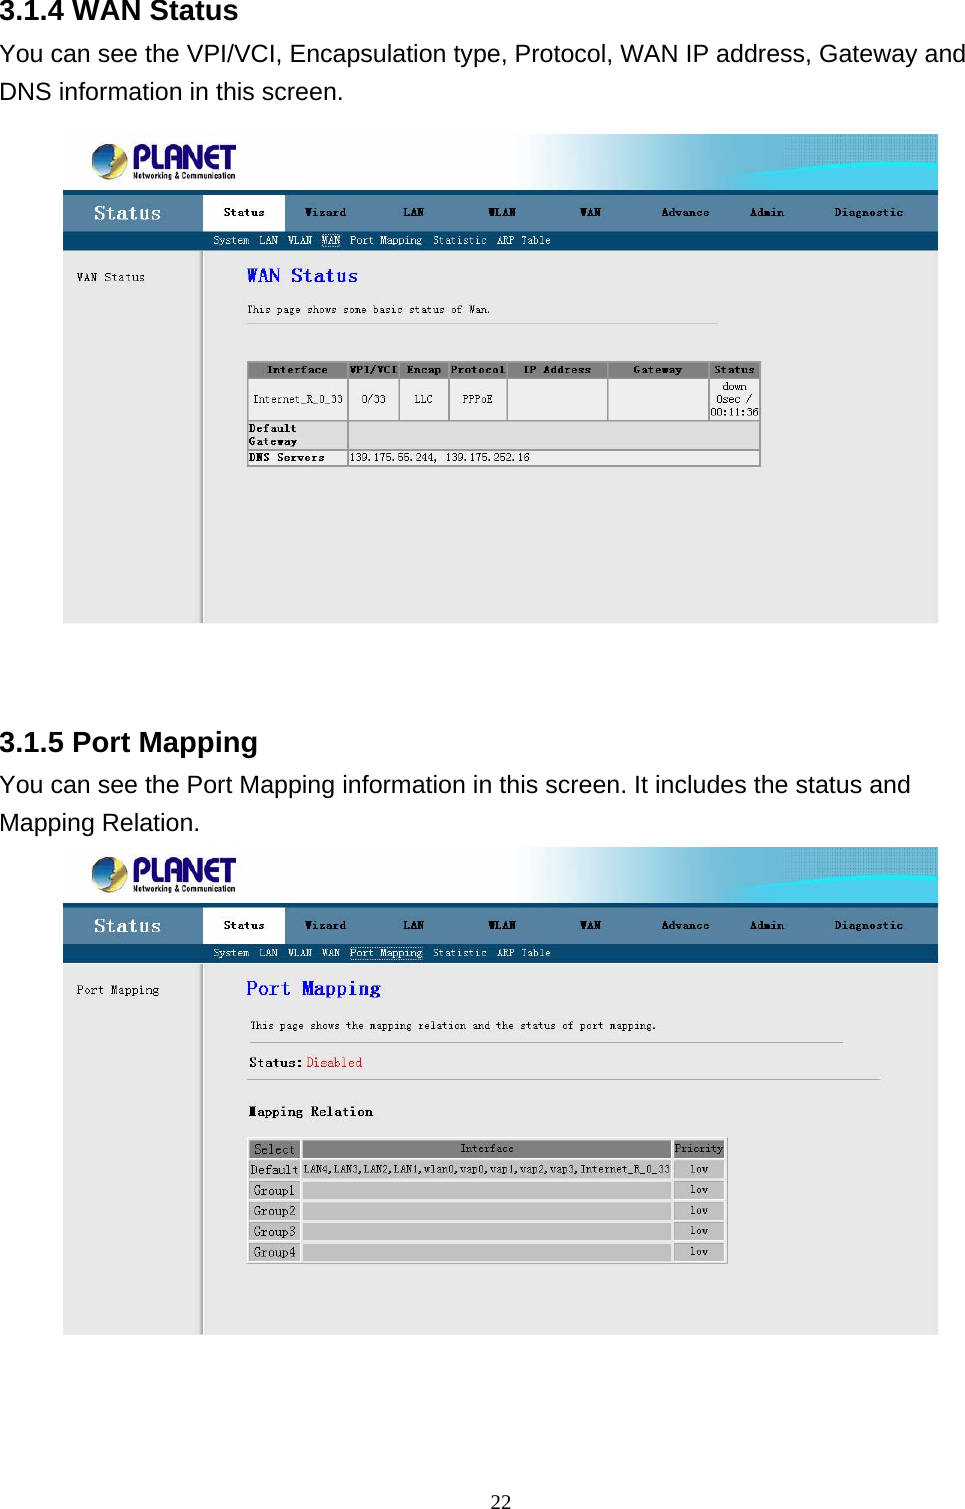 3.1.4 WAN Status You can see the VPI/VCI, Encapsulation type, Protocol, WAN IP address, Gateway and DNS information in this screen.   rt Mapping information in this screen. It includes the status and Mapping Relation. 3.1.5 Port Mapping You can see the Po 22 